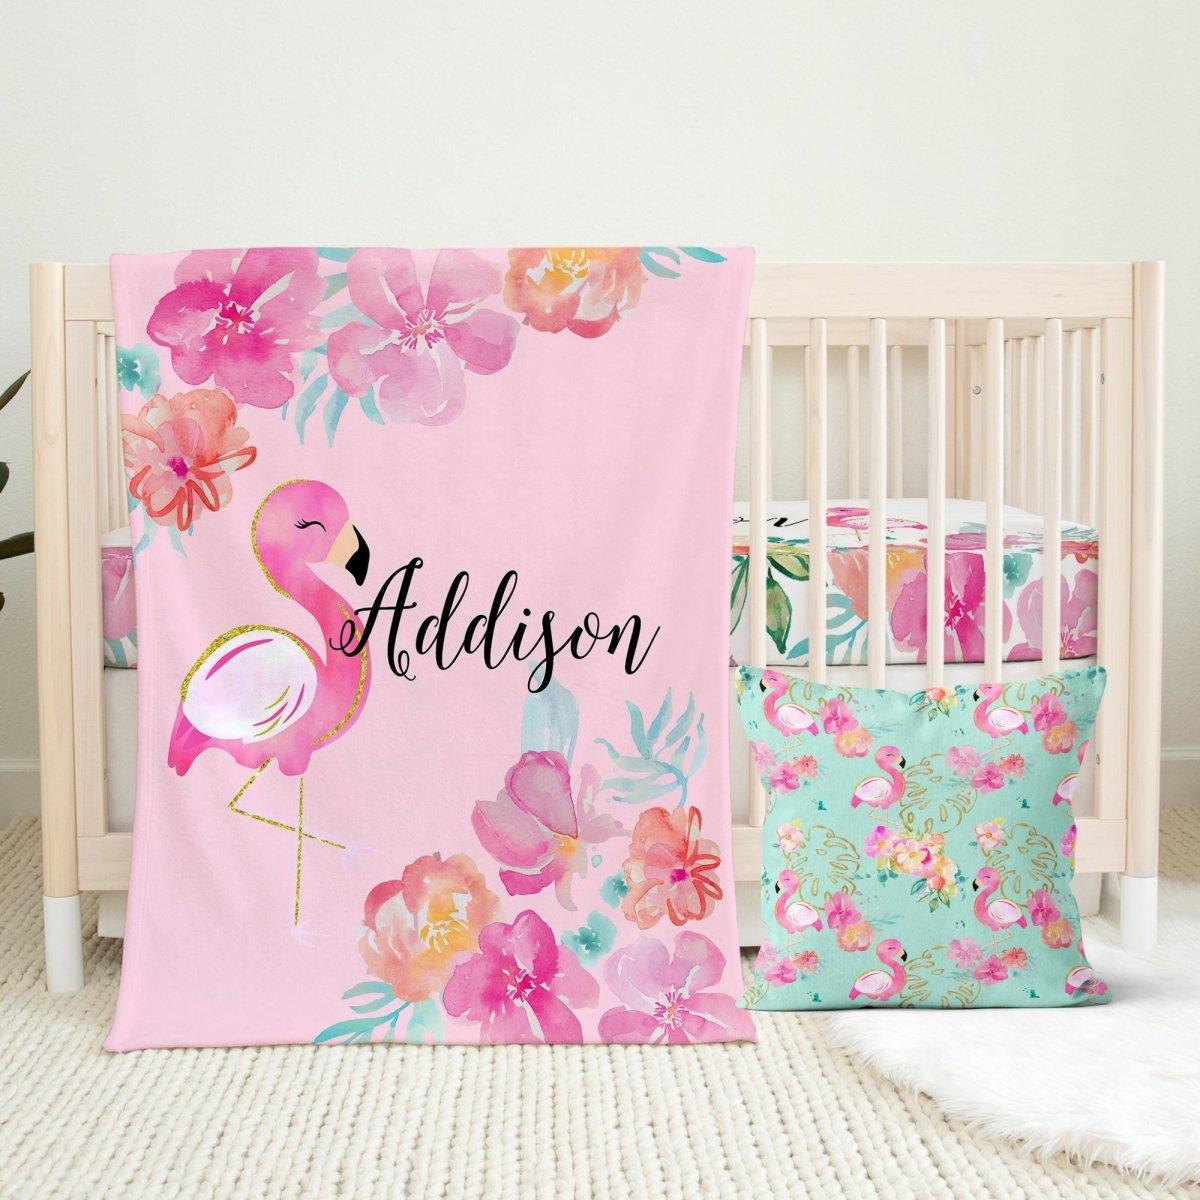 Tropical Flamingo Personalized Crib Sheet - gender_girl, Personalized_Yes, text